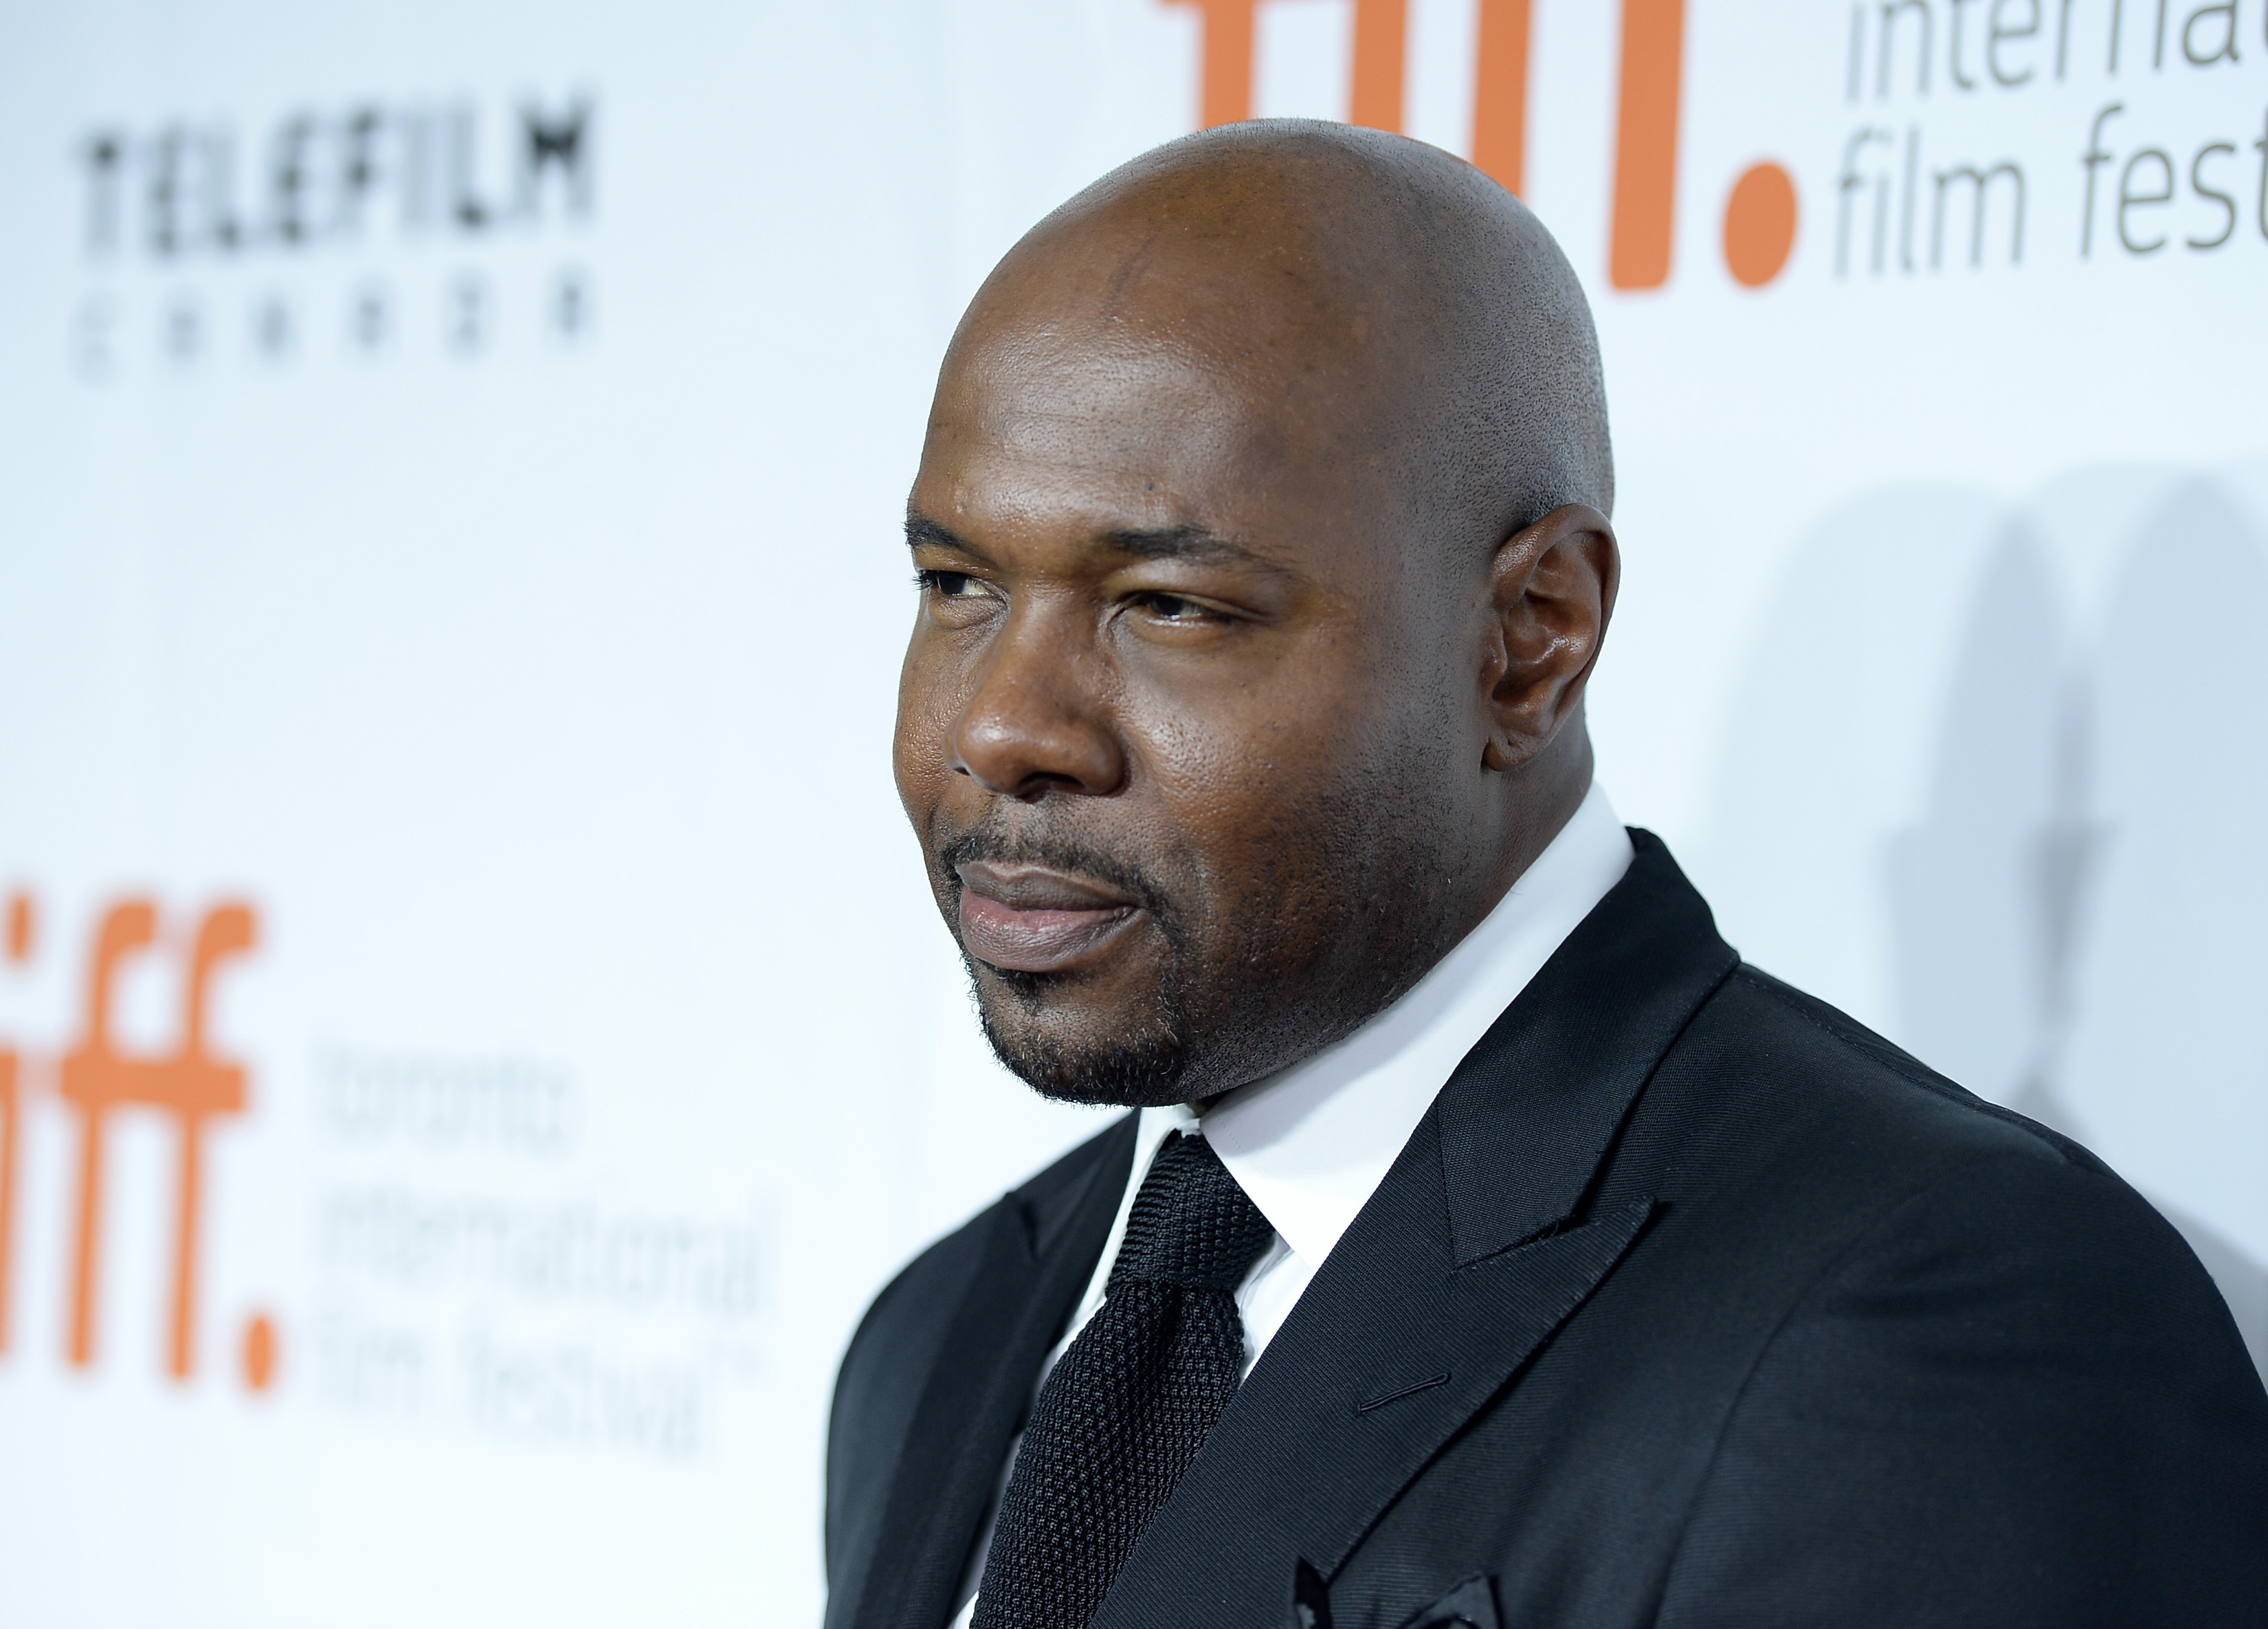 TORONTO, ON - SEPTEMBER 07:  Director Antoine Fuqua attends "The Equalizer" premiere during the 2014 Toronto International Film Festival at Roy Thomson Hall on September 7, 2014 in Toronto, Canada.  (Photo by George Pimentel/WireImage,)